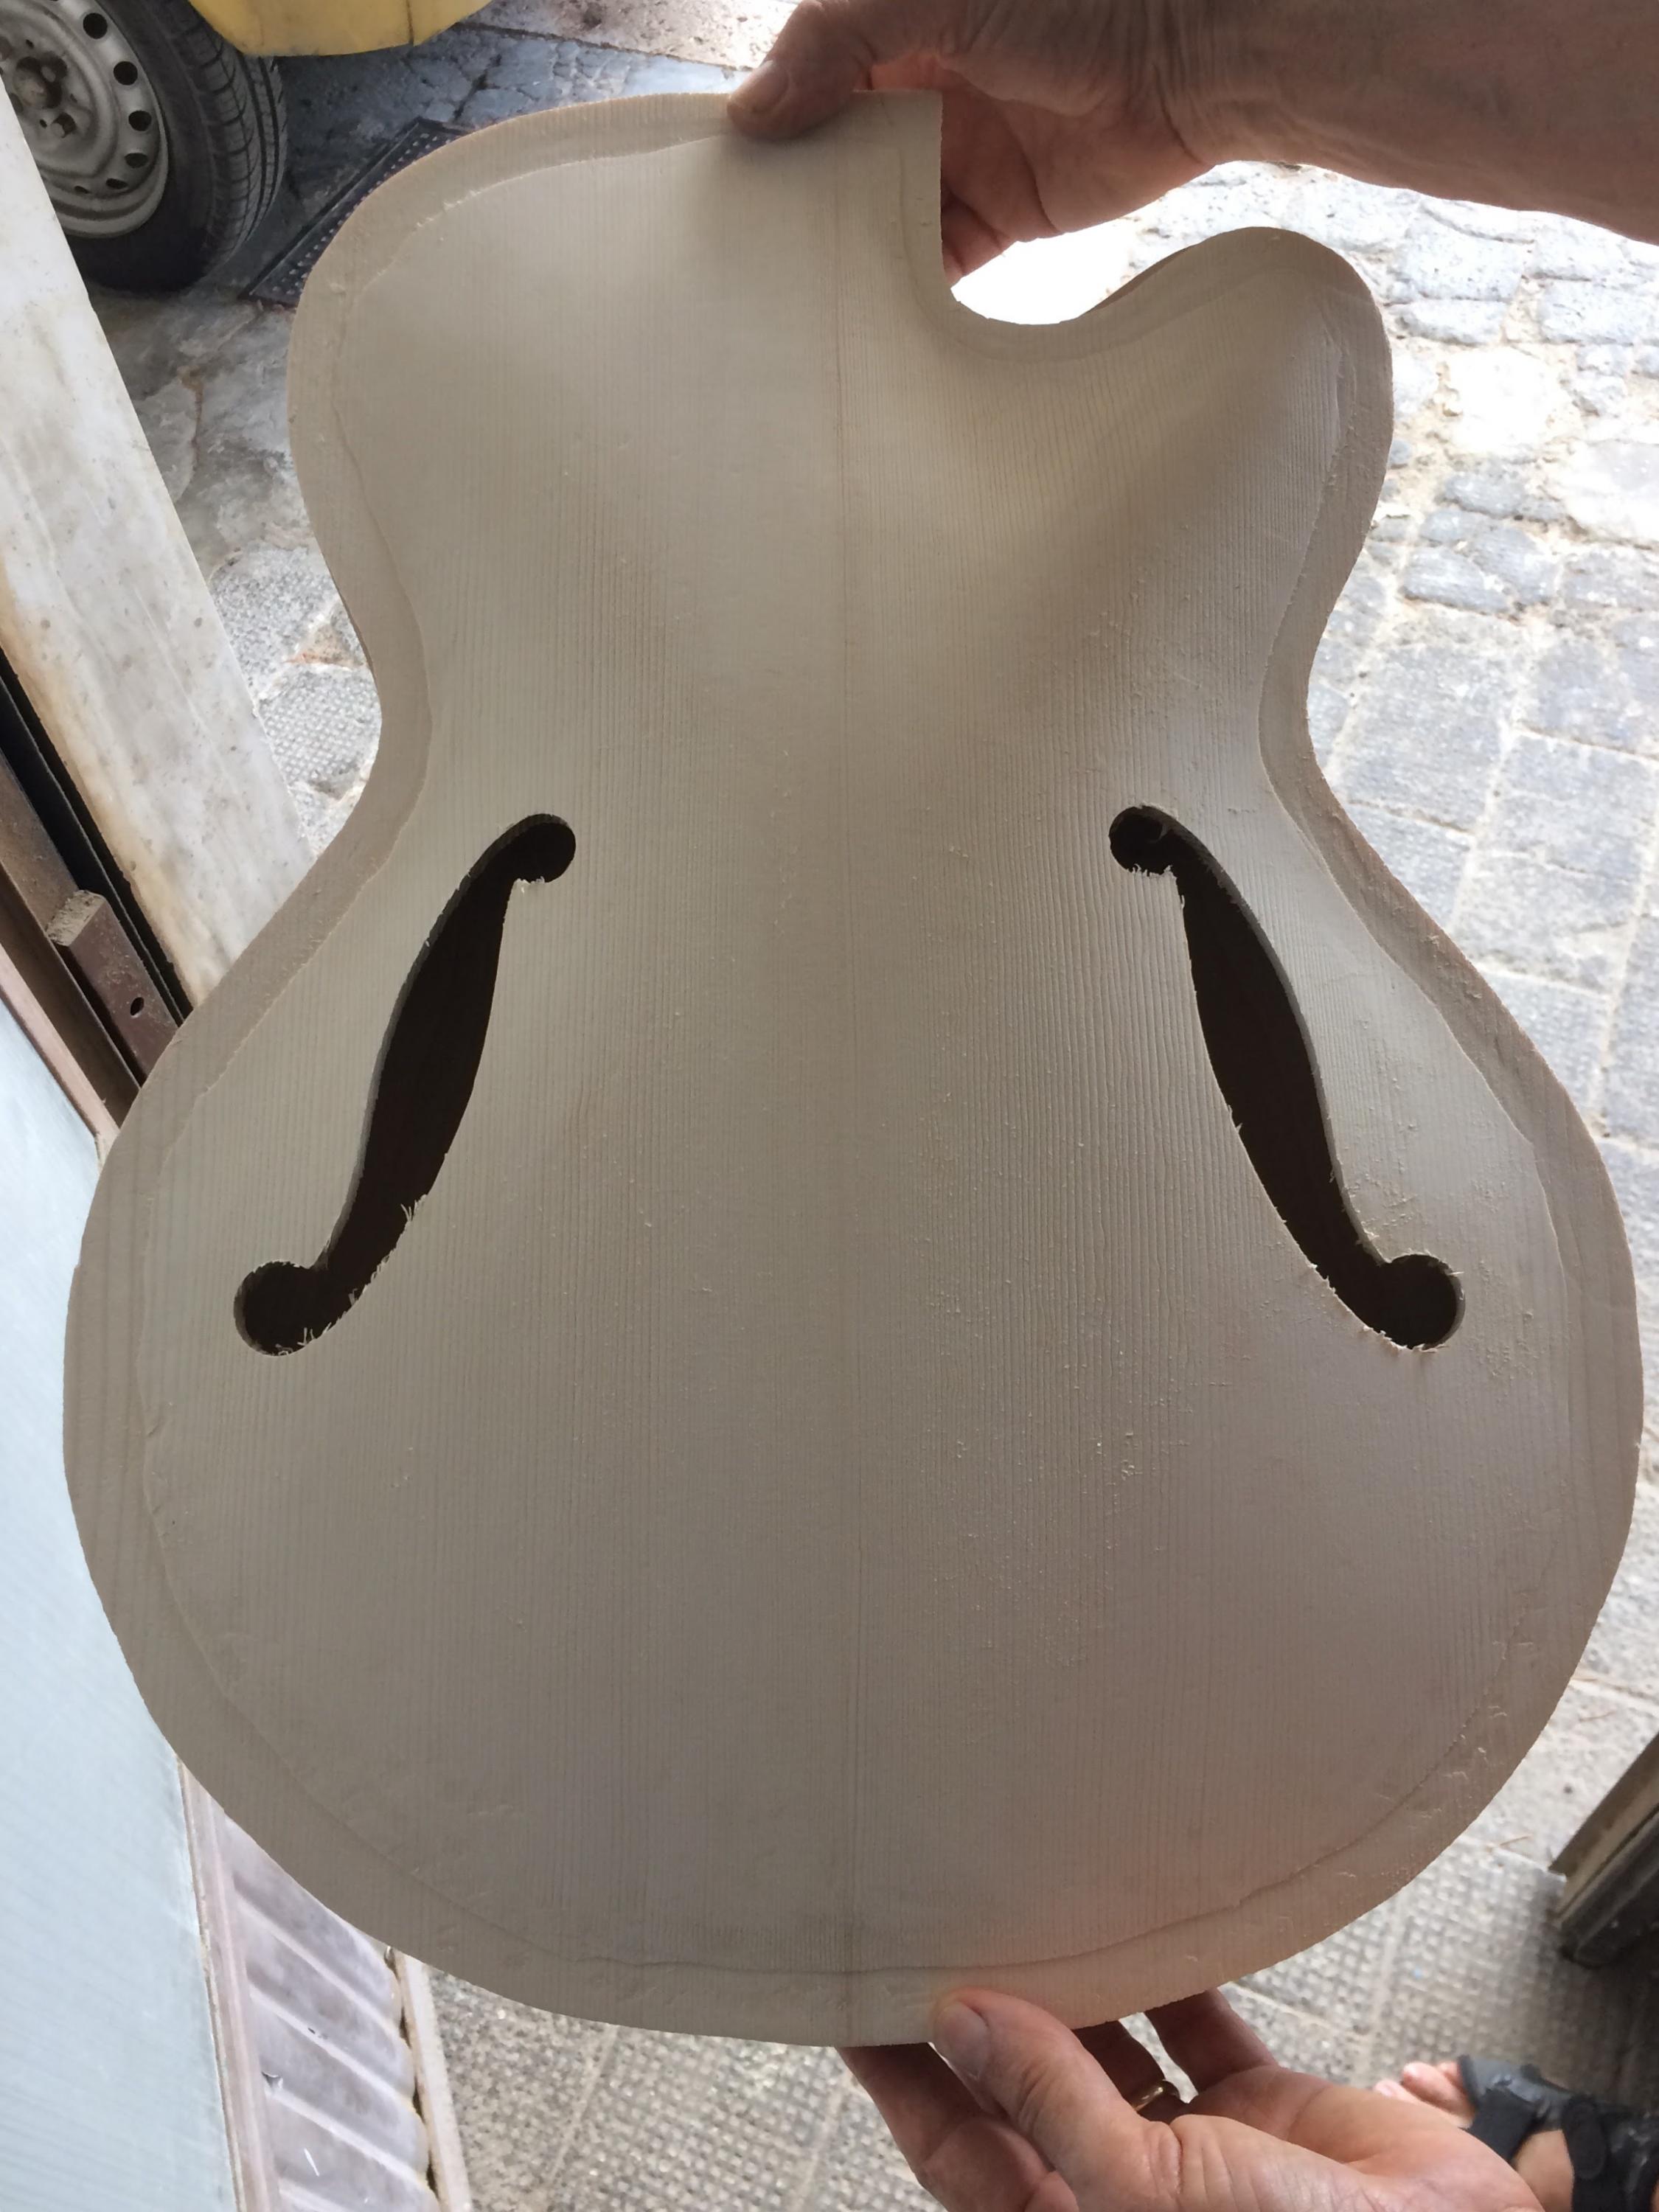 Solid wood Archtop build-img_7132-jpg